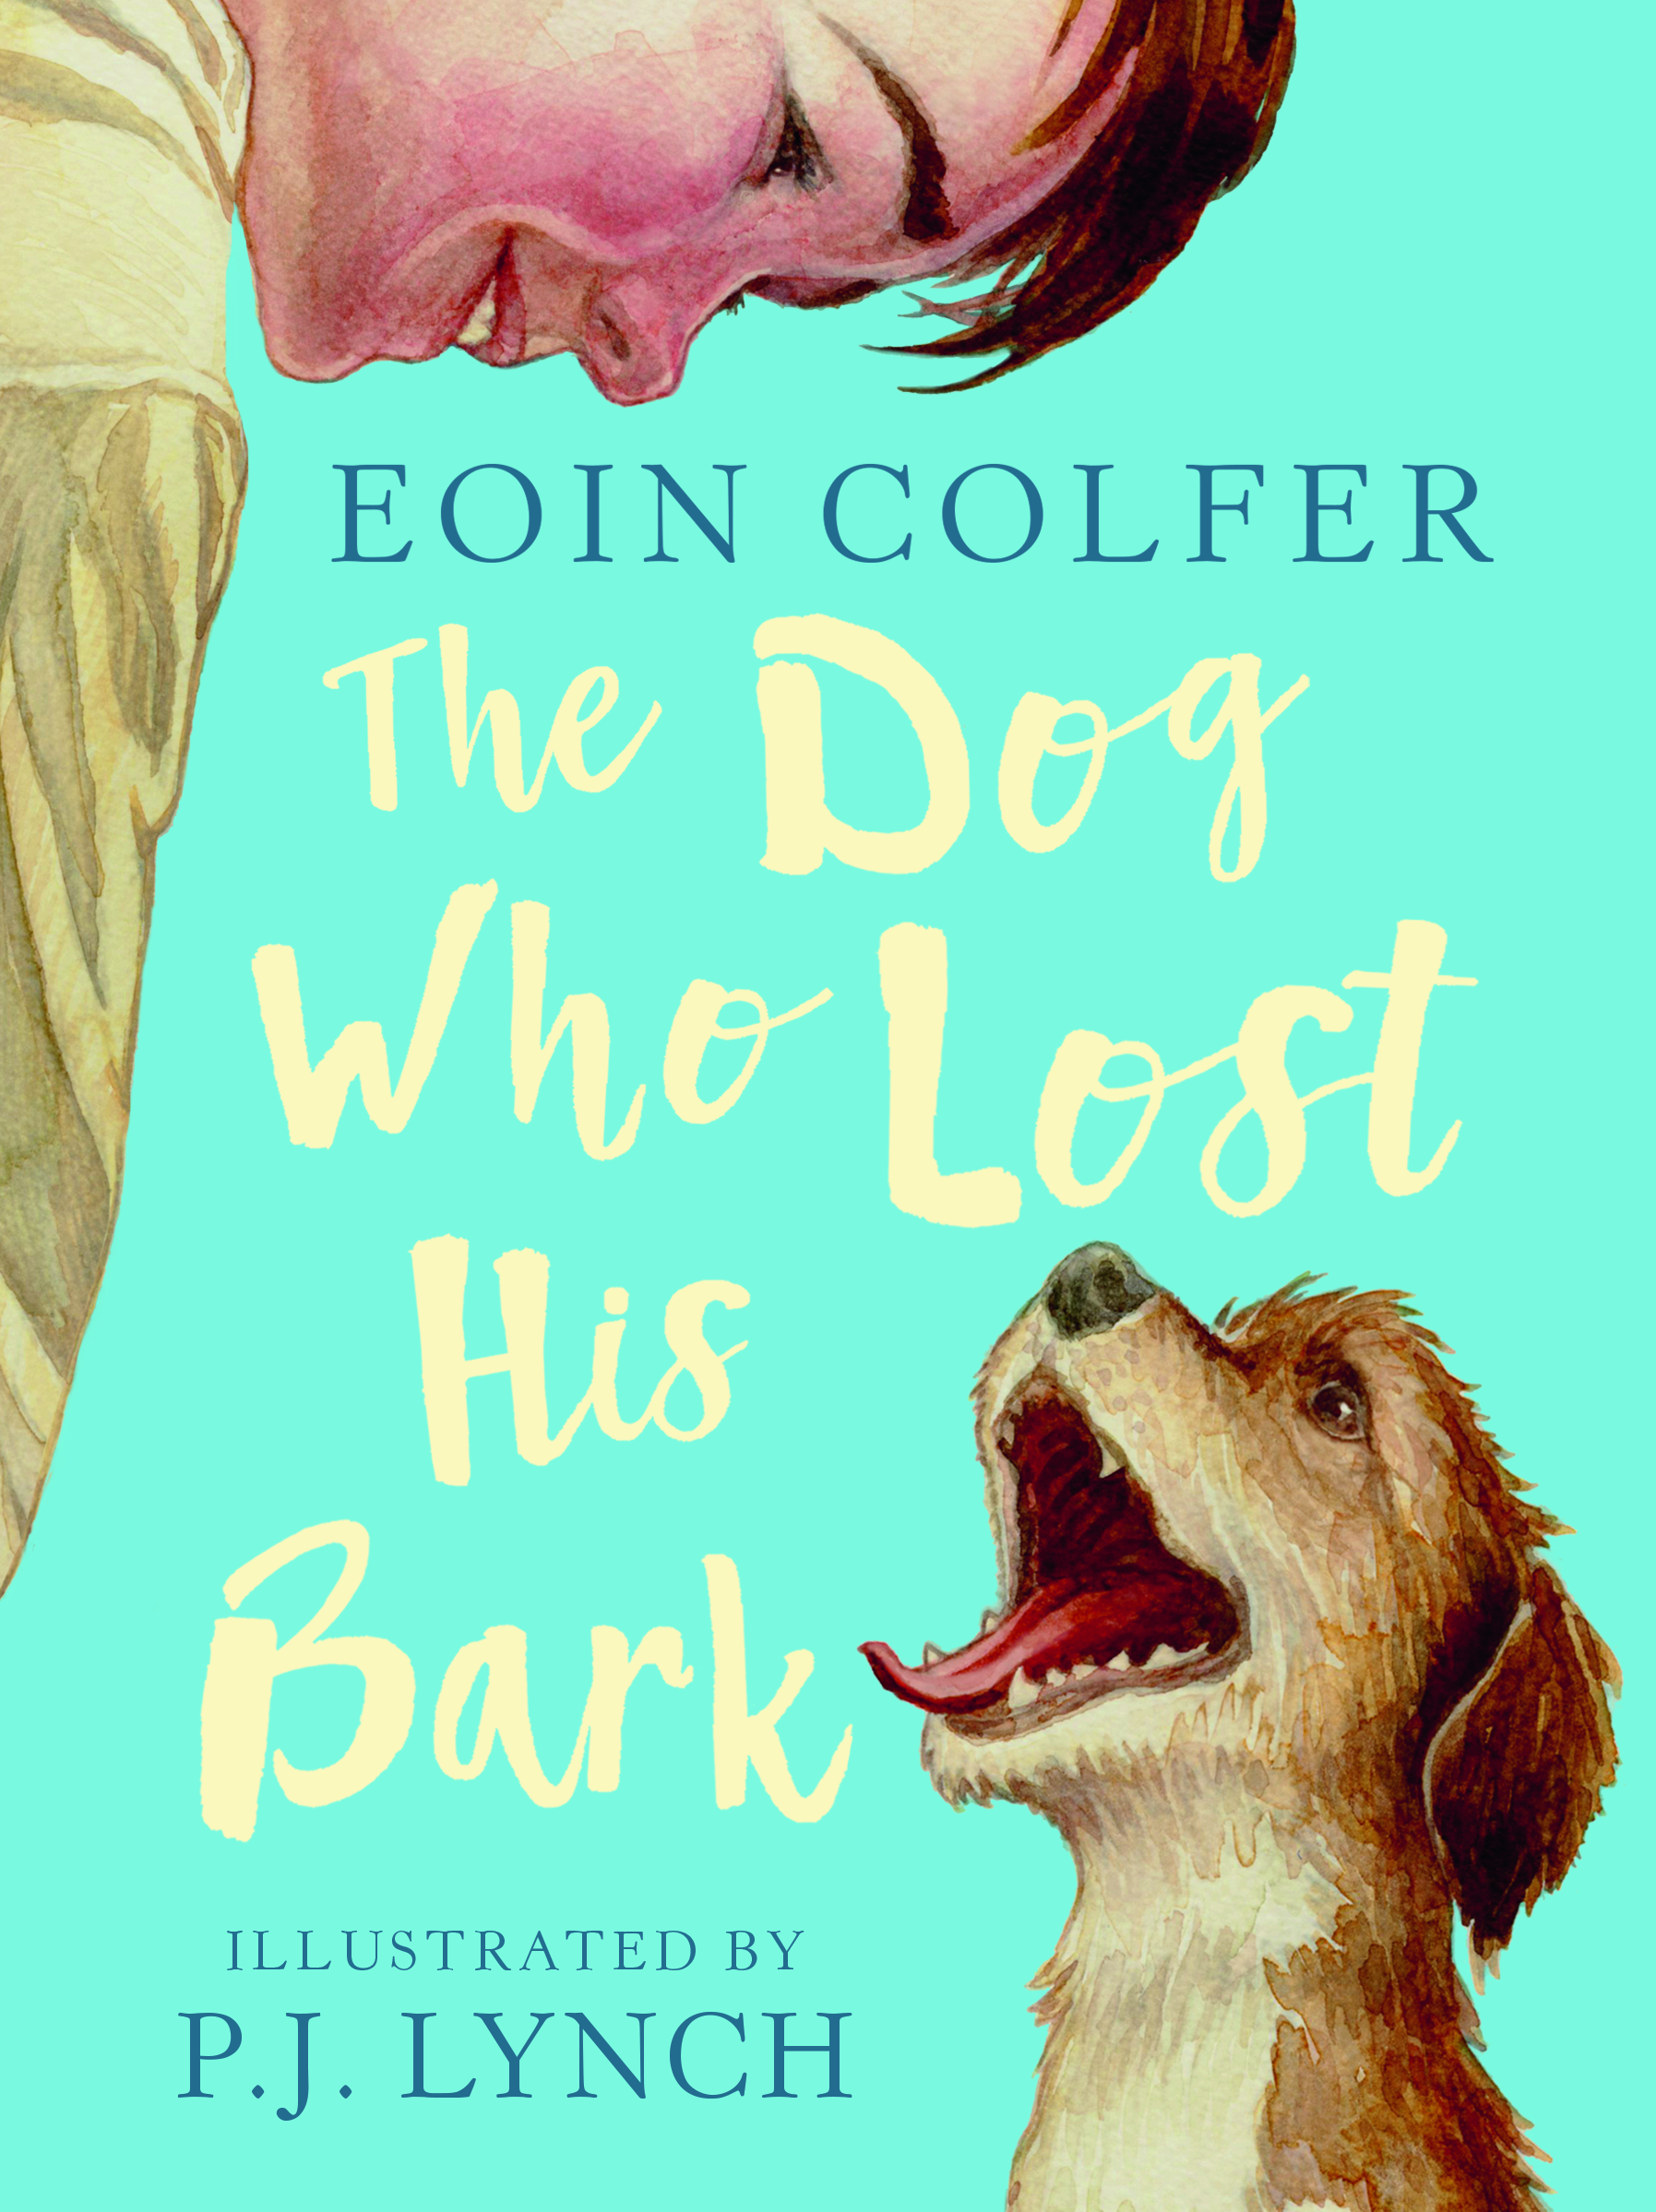 The-Dog-Who-Lost-His-Bark